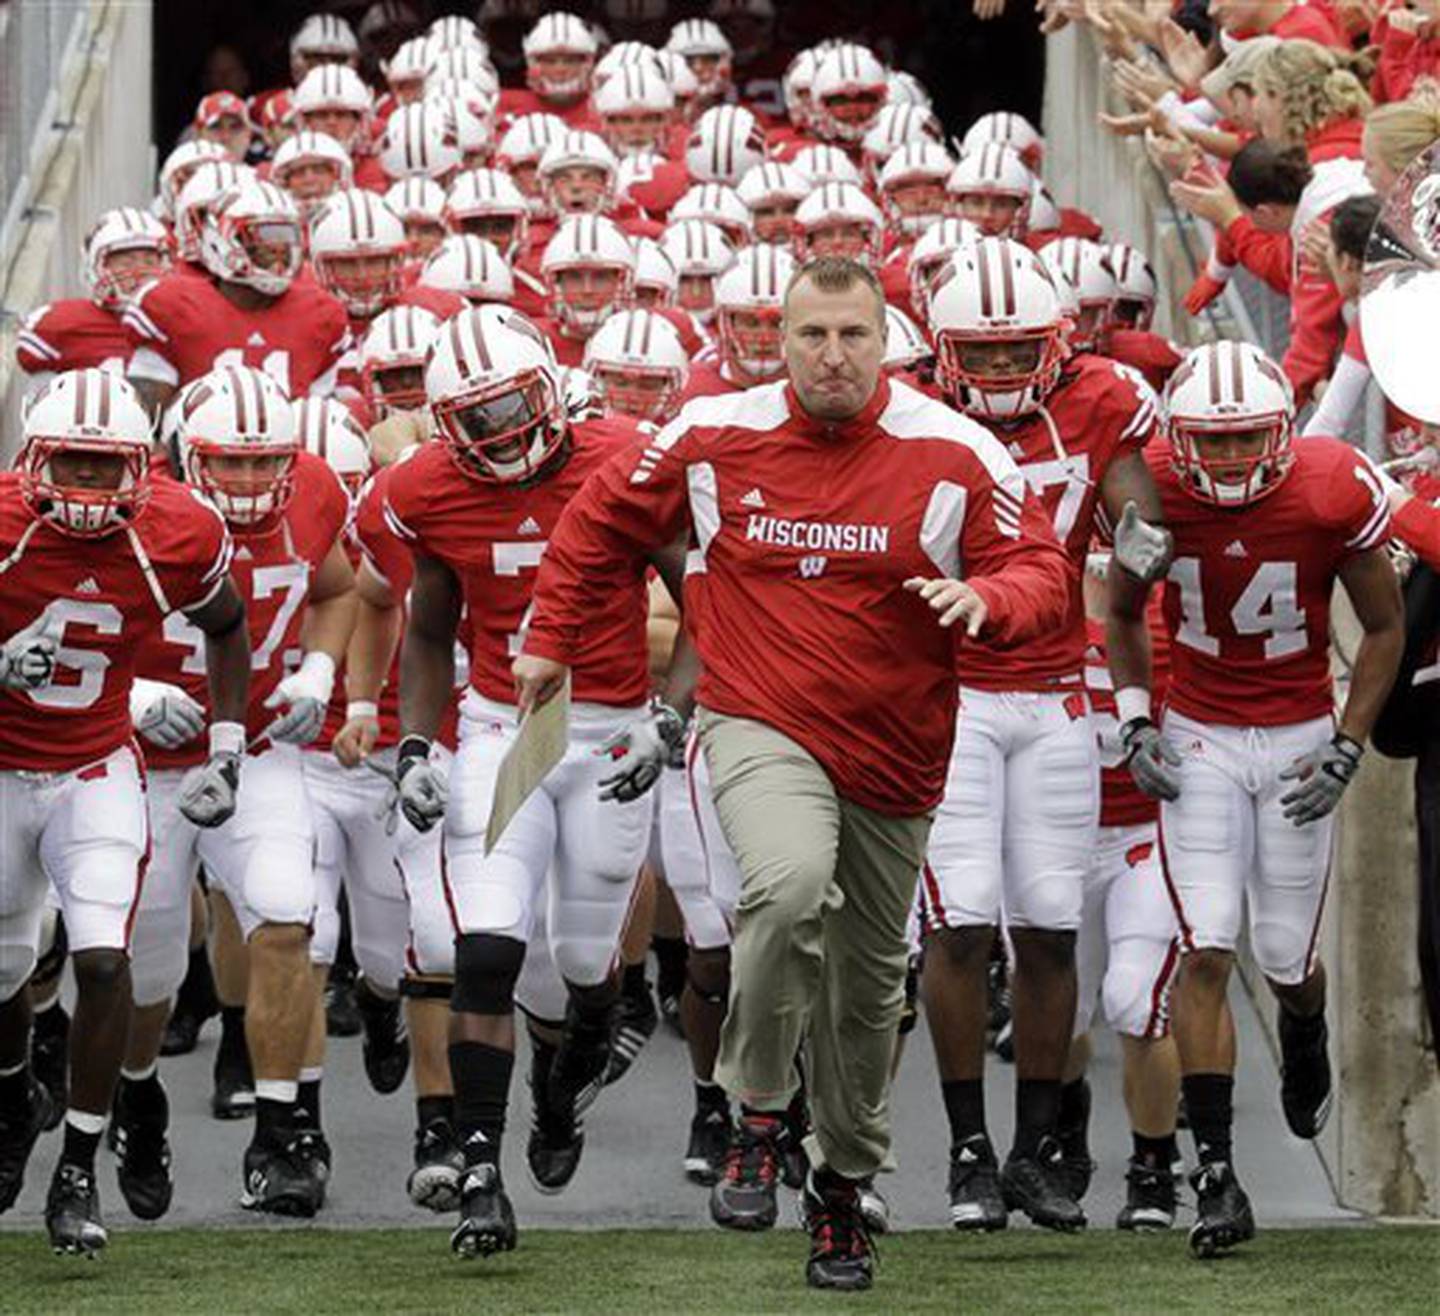 Wisconsin coach Bret Bielema leads his team onto the field before a game against San Jose State on Sept. 11, 2010, in Madison, Wis.